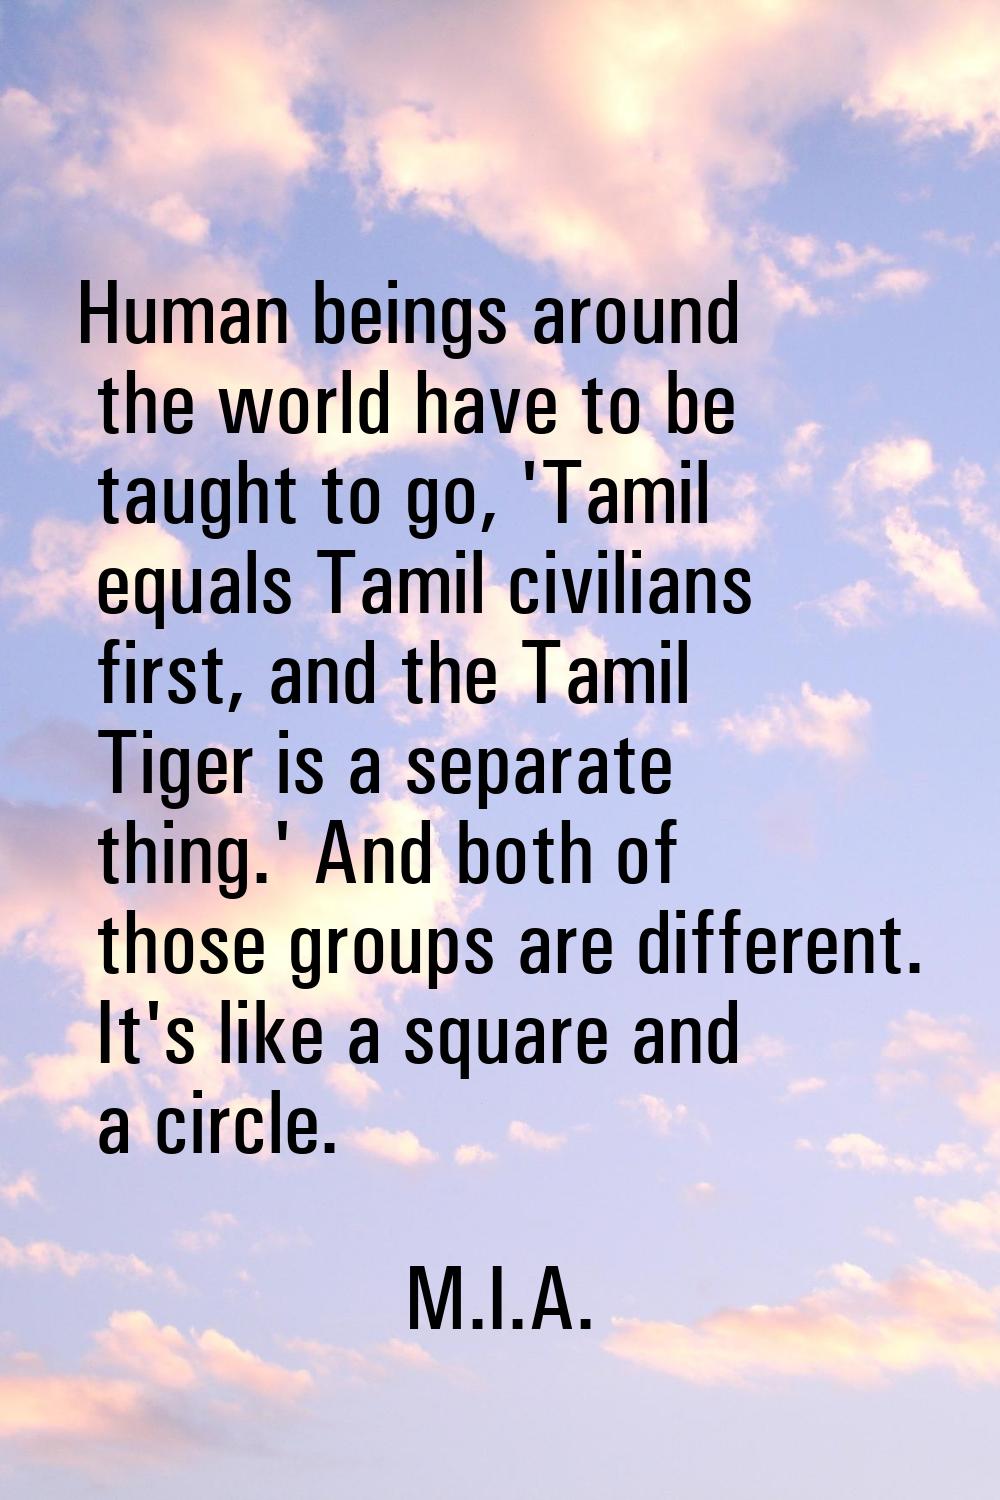 Human beings around the world have to be taught to go, 'Tamil equals Tamil civilians first, and the